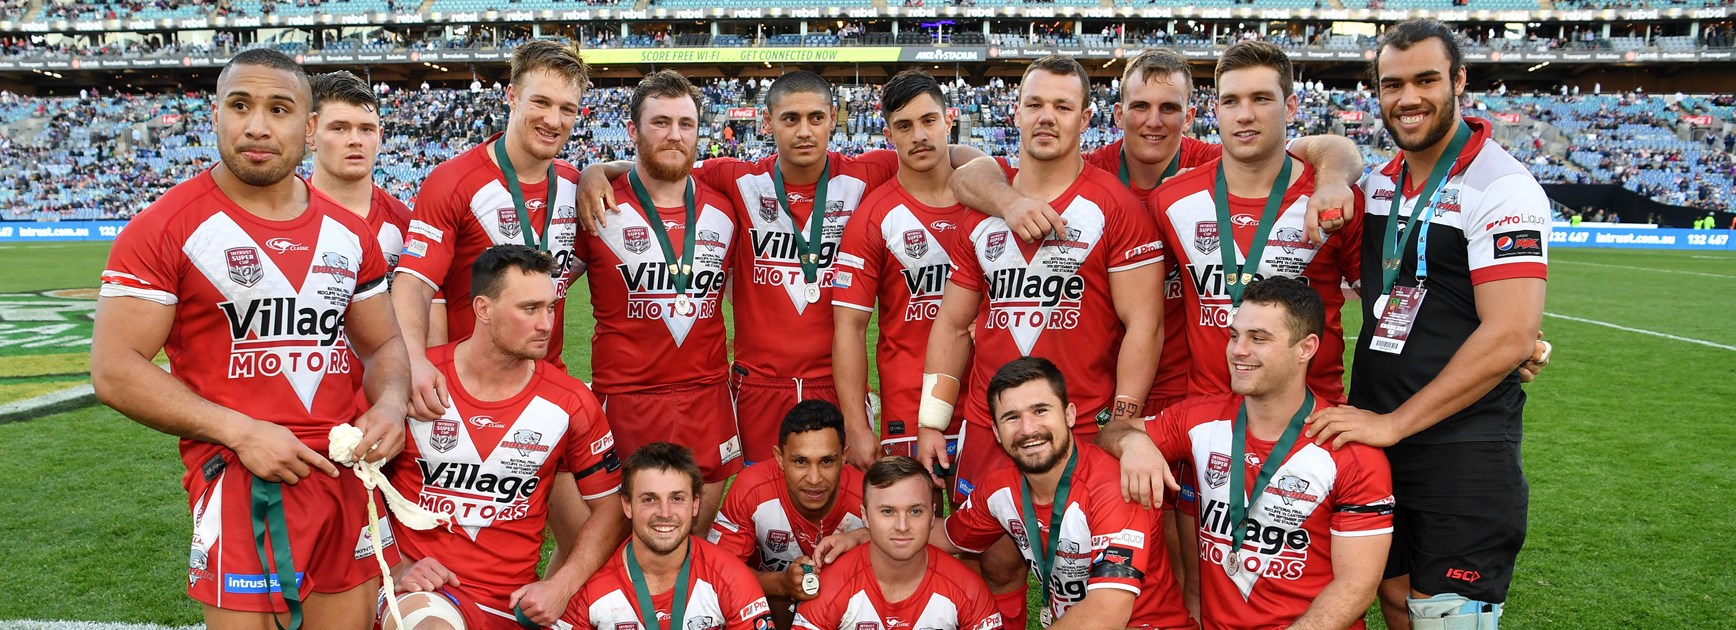 Redcliffe Dolphins' 2018 Intrust Super Cup winners lost the interstate clash.